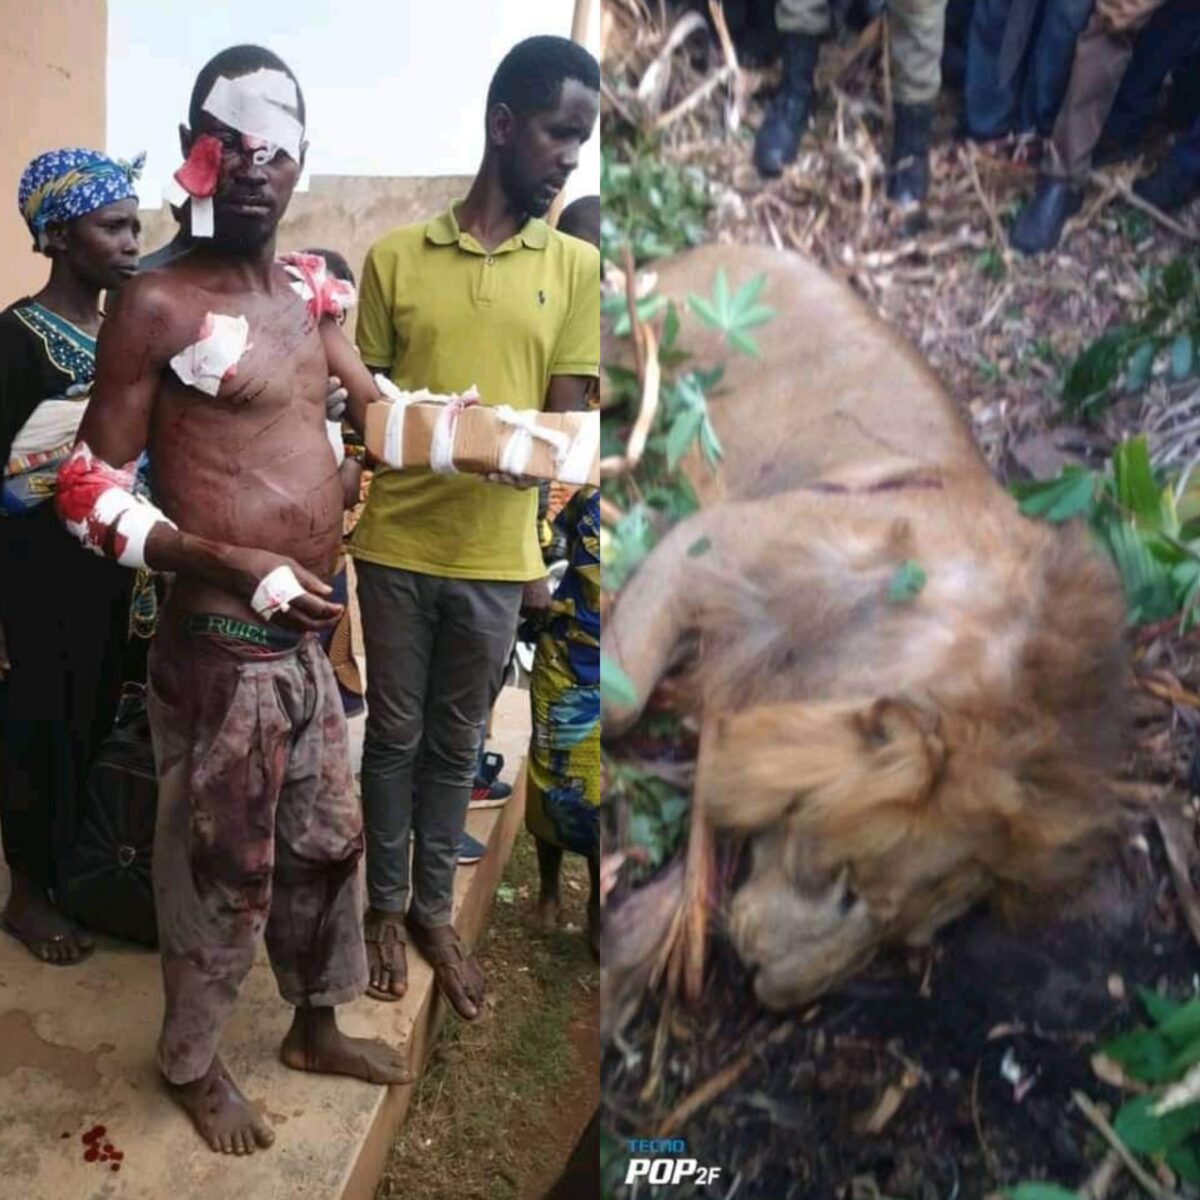 Your Energy Is Mysterious’ -Reactions As Man Single-Handedly Fights And Kills Lion In Fierce Fight [PHOTOS]